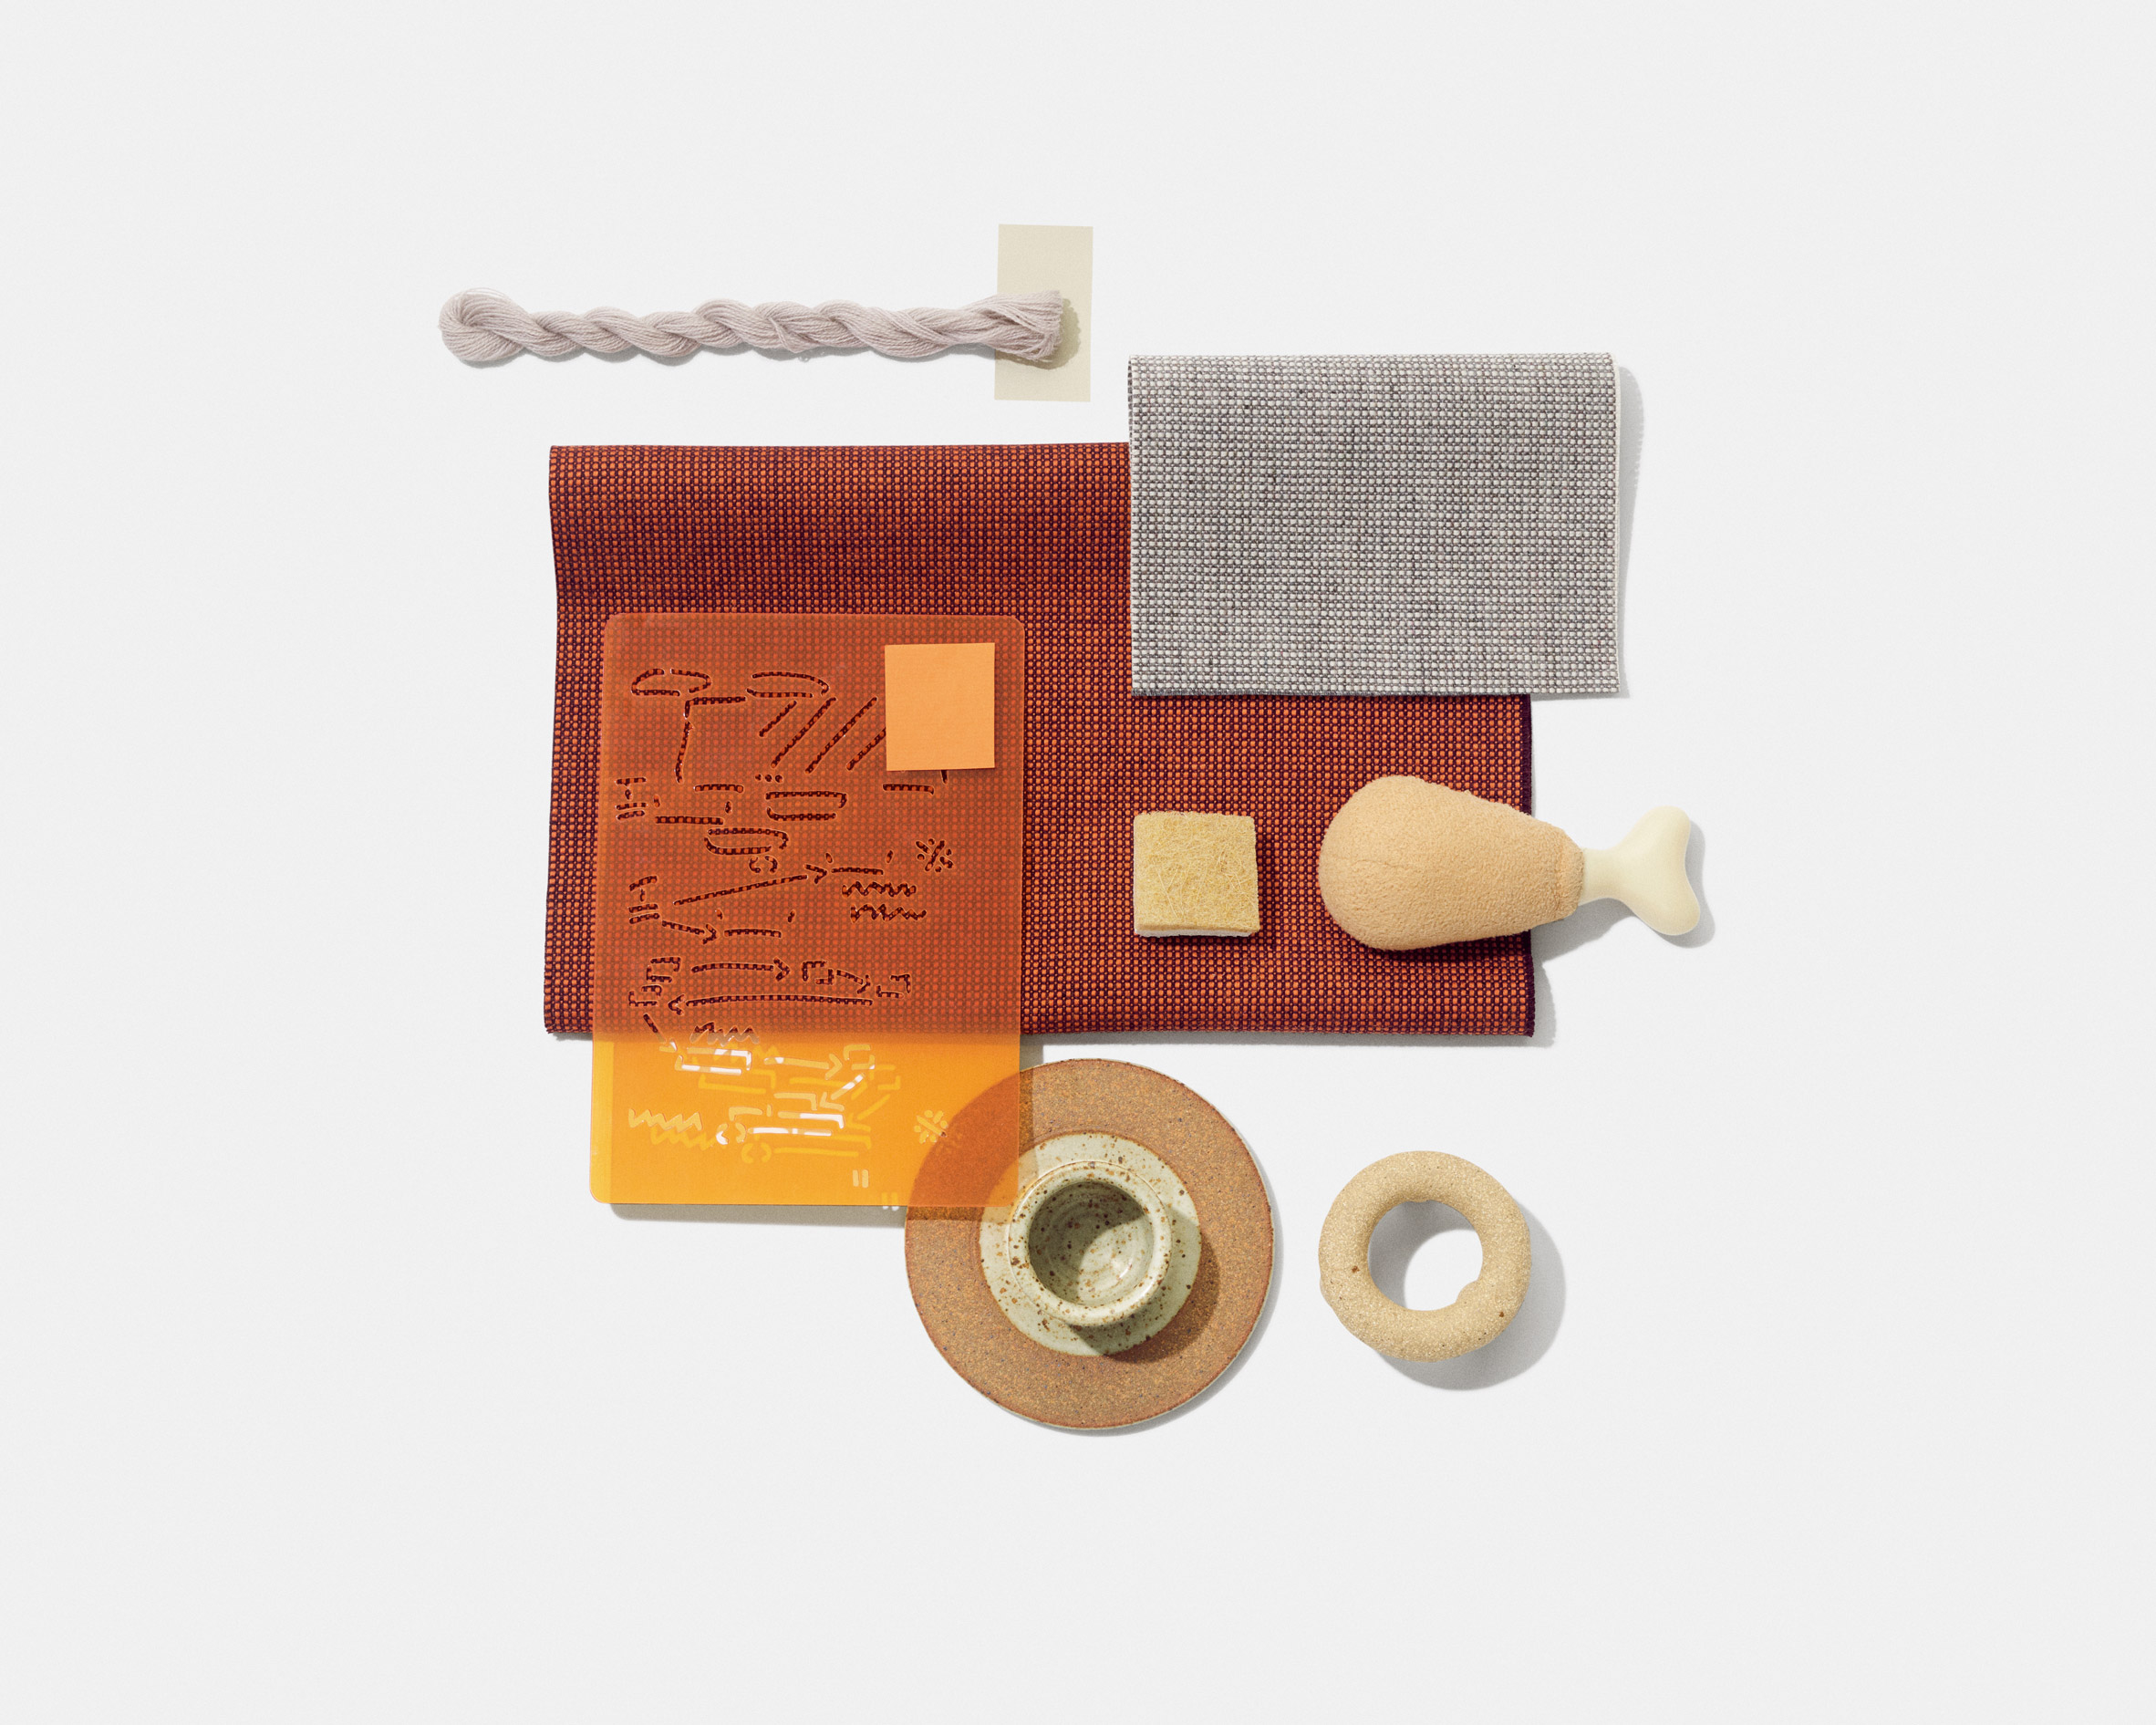 Swatches of Kvadrat's Sabi textile upholstery in a deep orange colour with similarly coloured objects